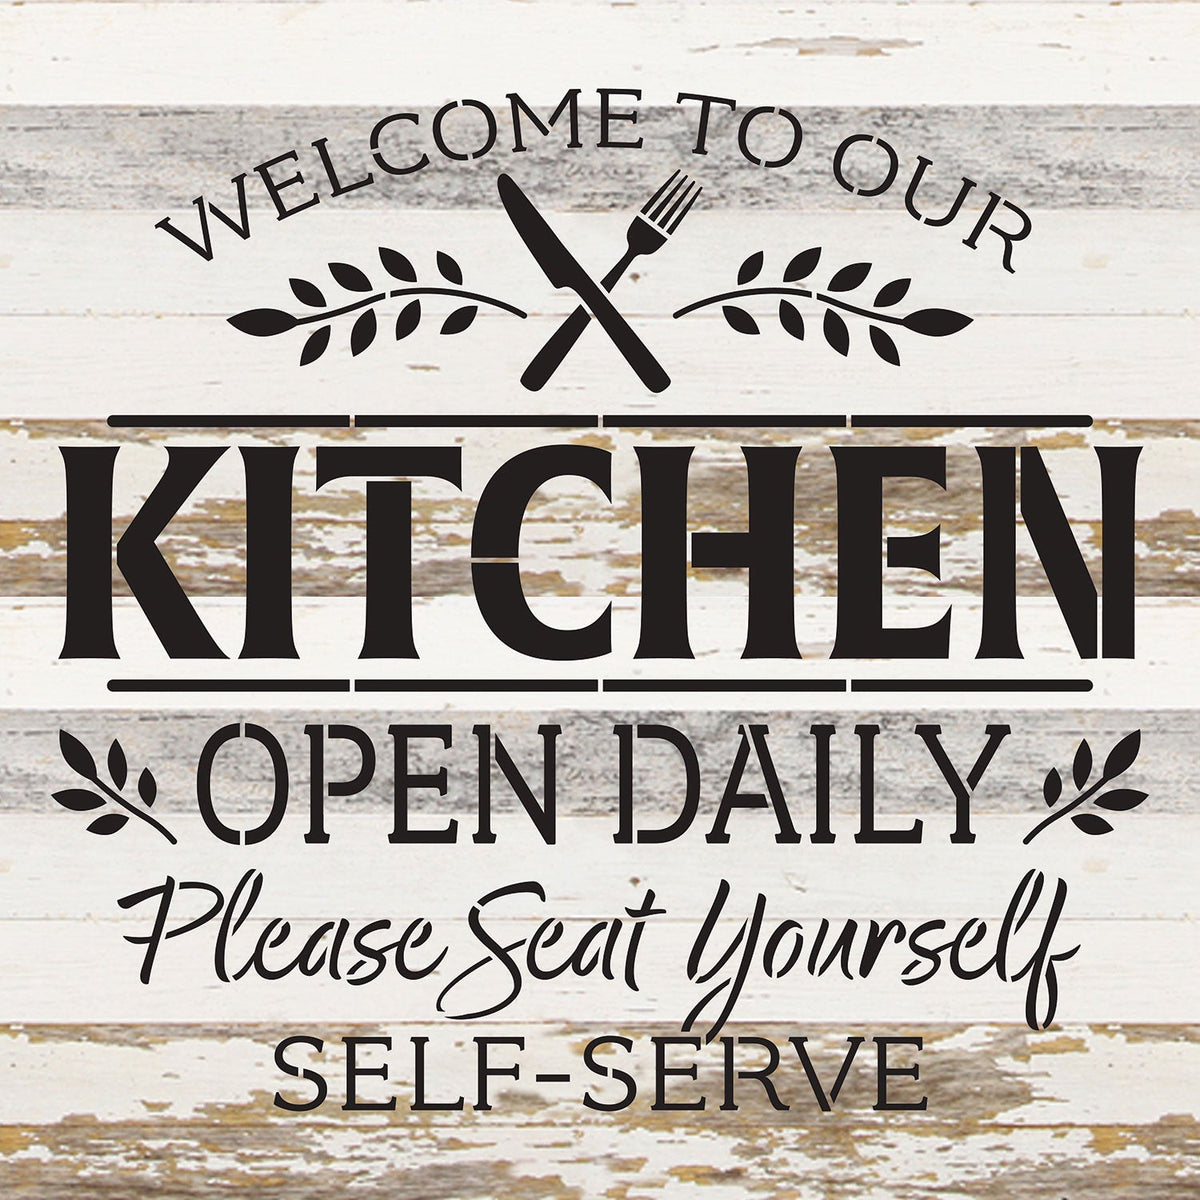 Welcome to our Kitchen Open Daily. Please seat yourself. Self-Serve / 14x14 Reclaimed Wood Wall Decor